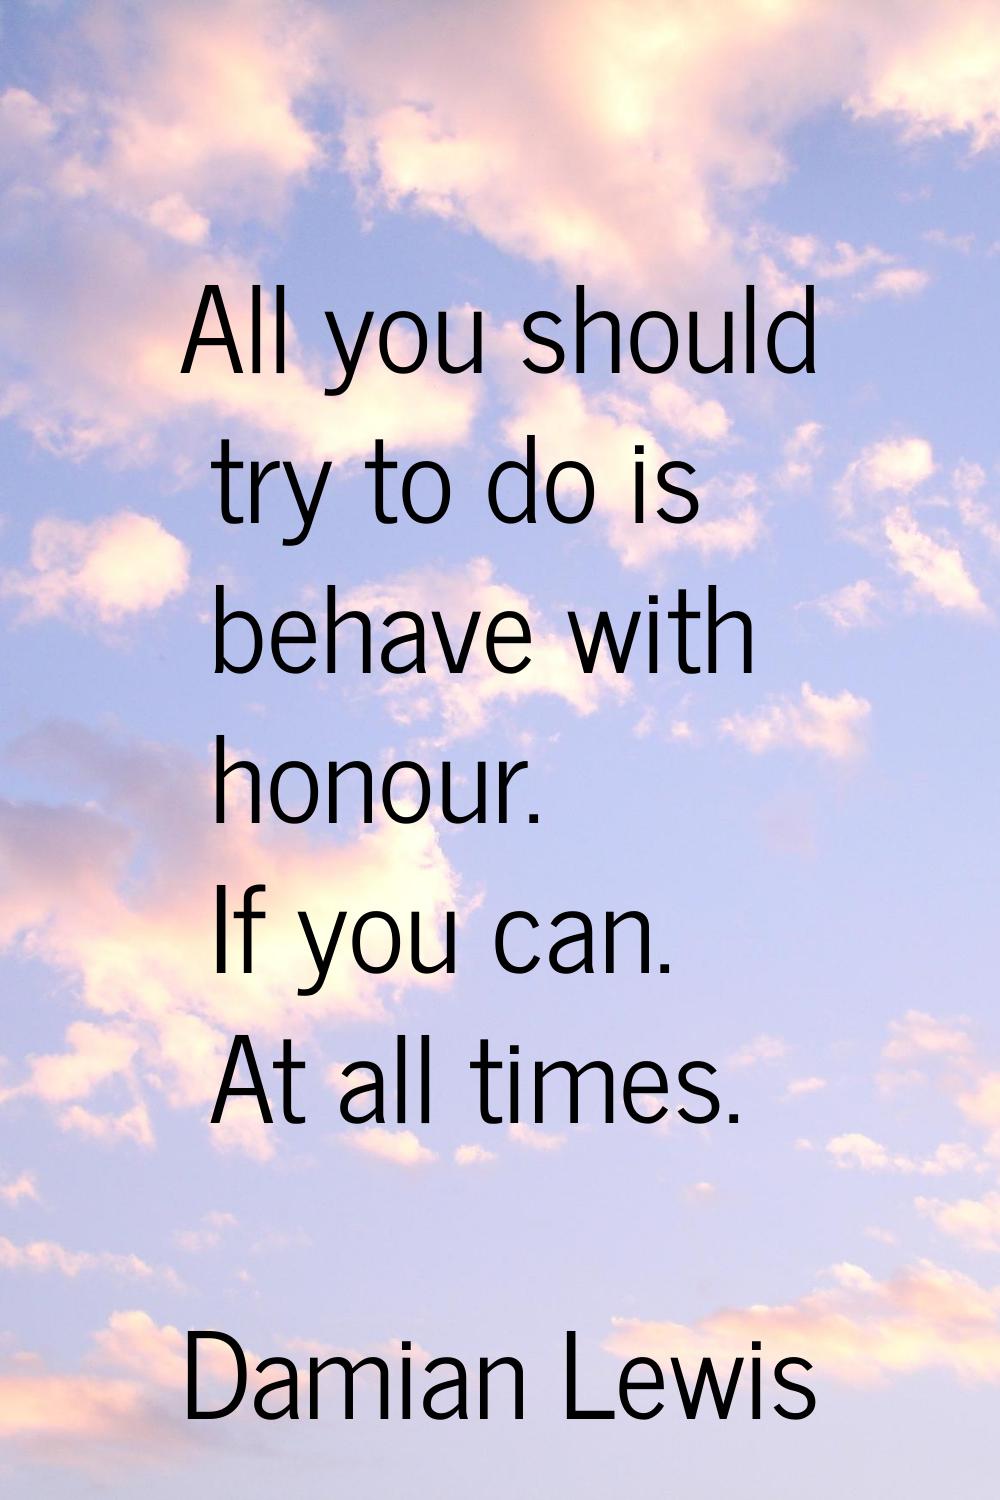 All you should try to do is behave with honour. If you can. At all times.